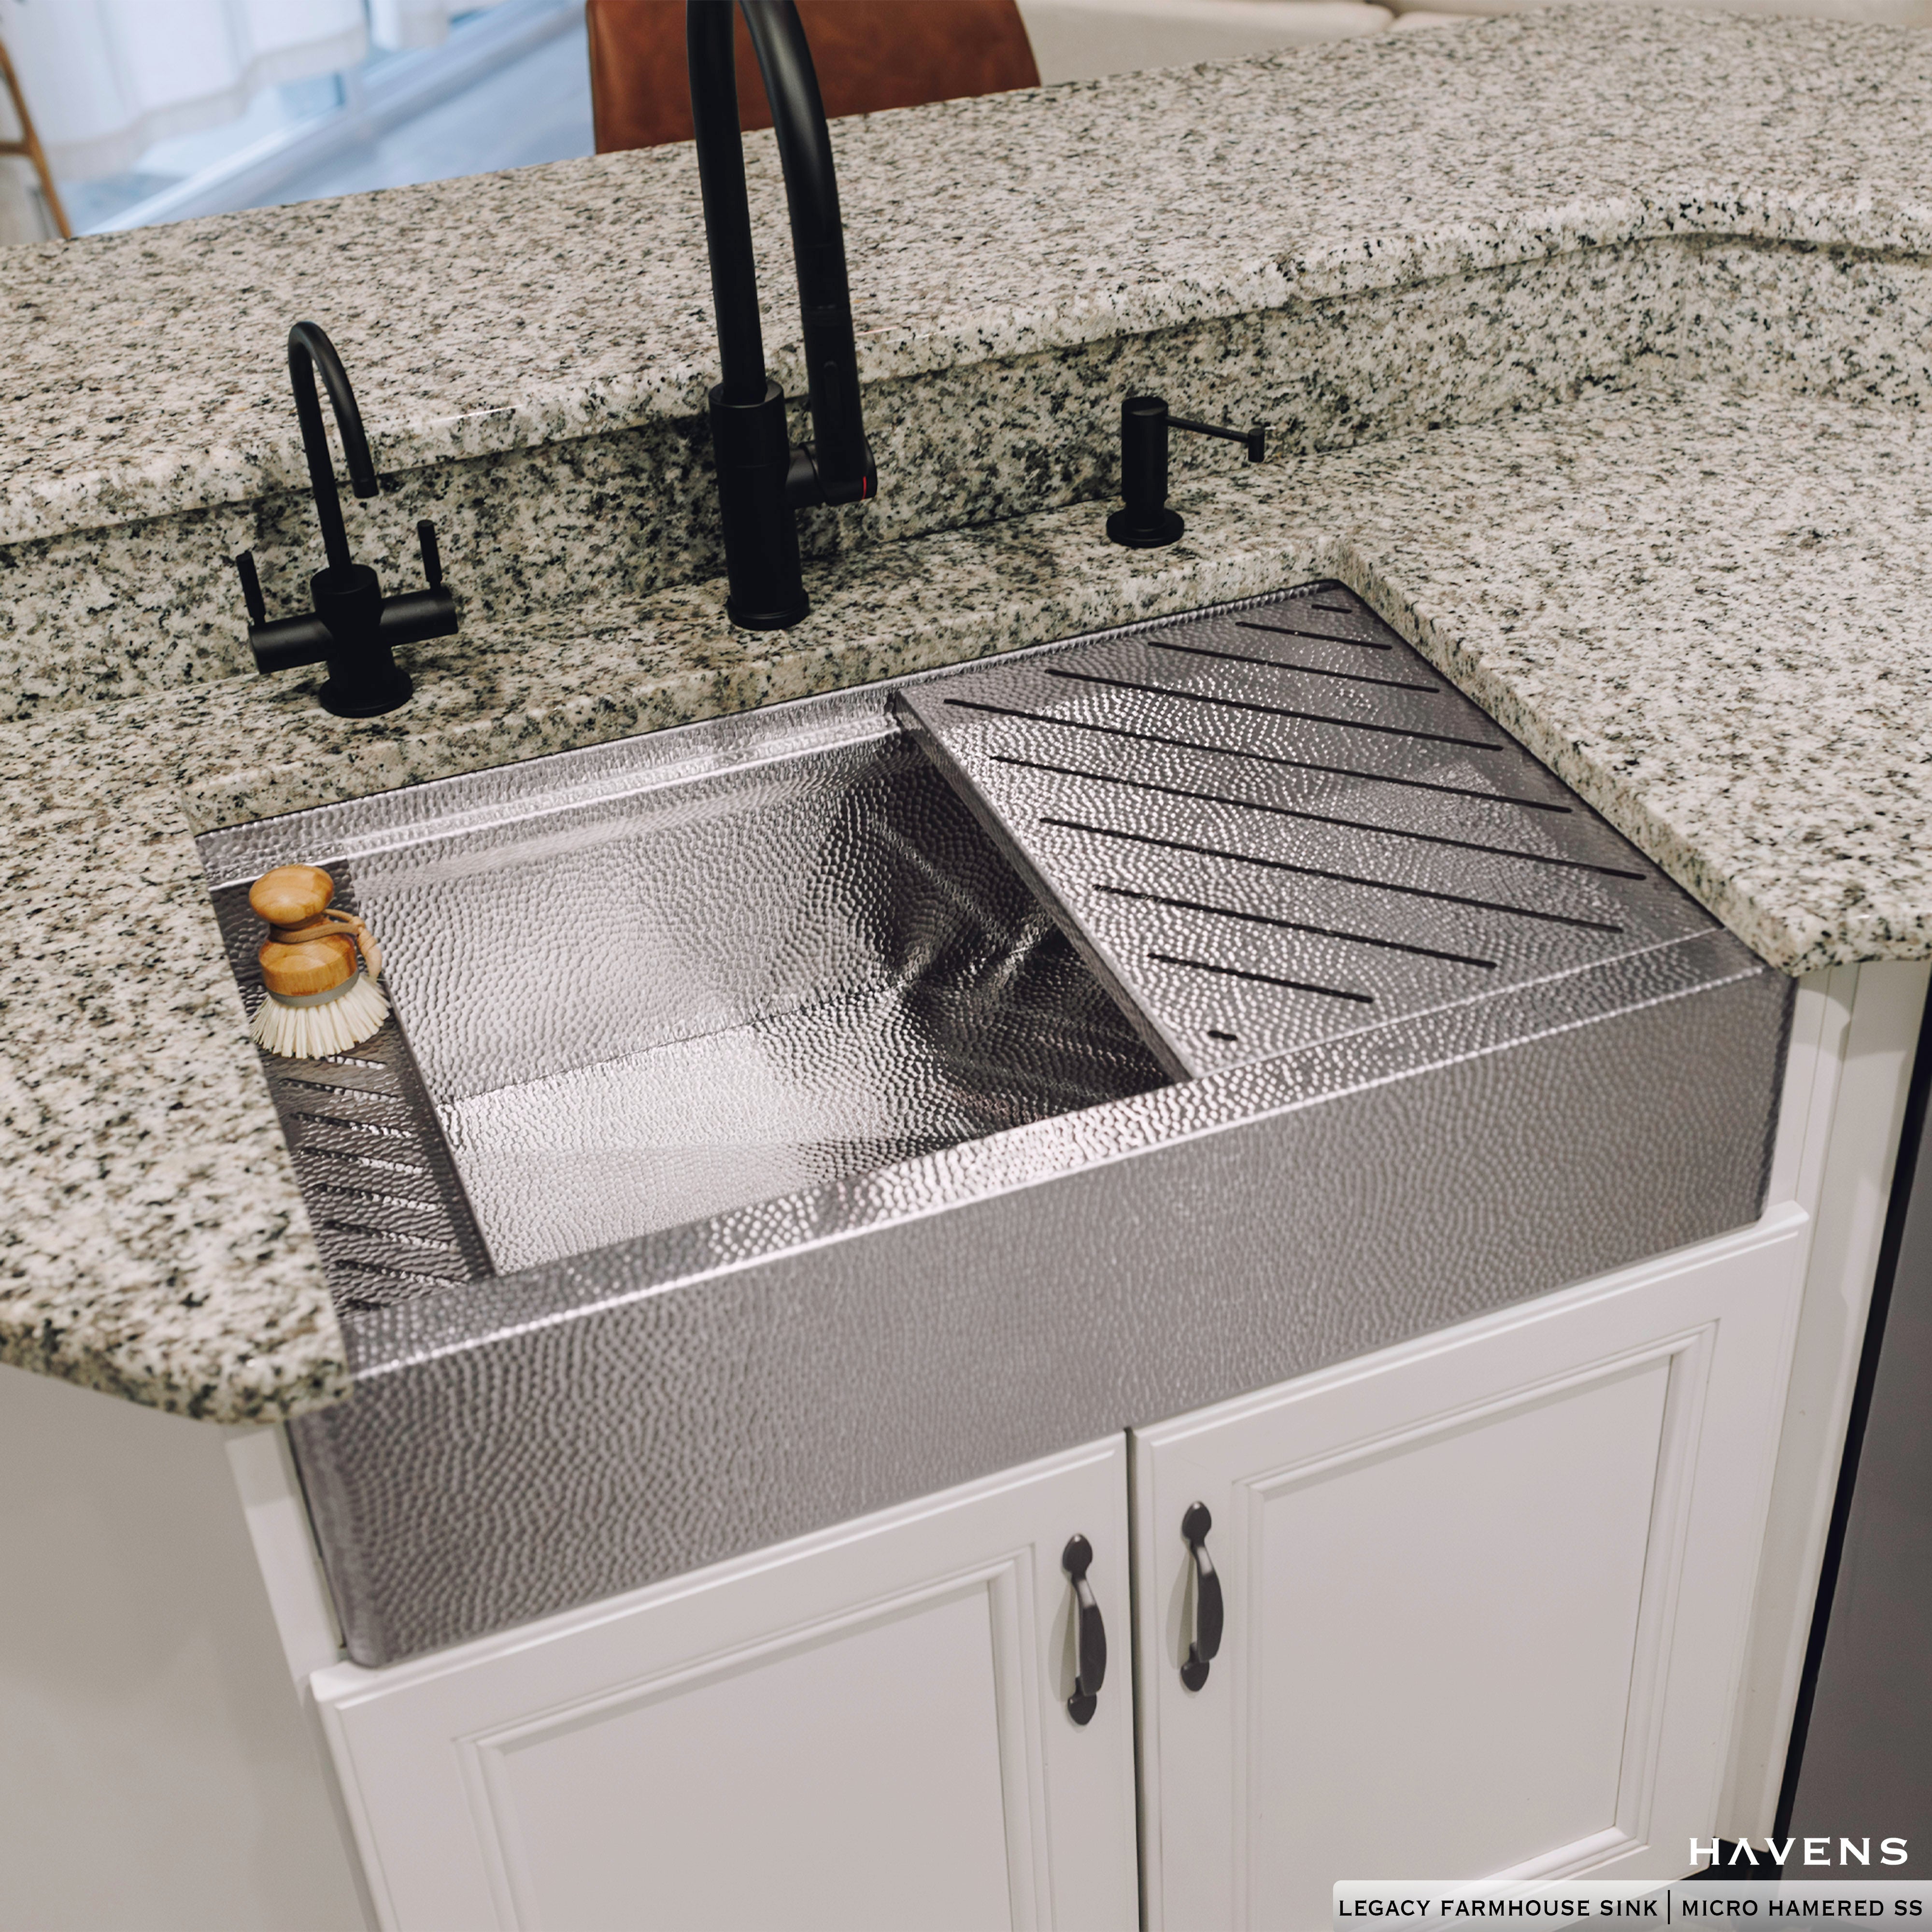 Legacy Farmhouse Sink - Stainless Steel - Havens | Luxury Metals